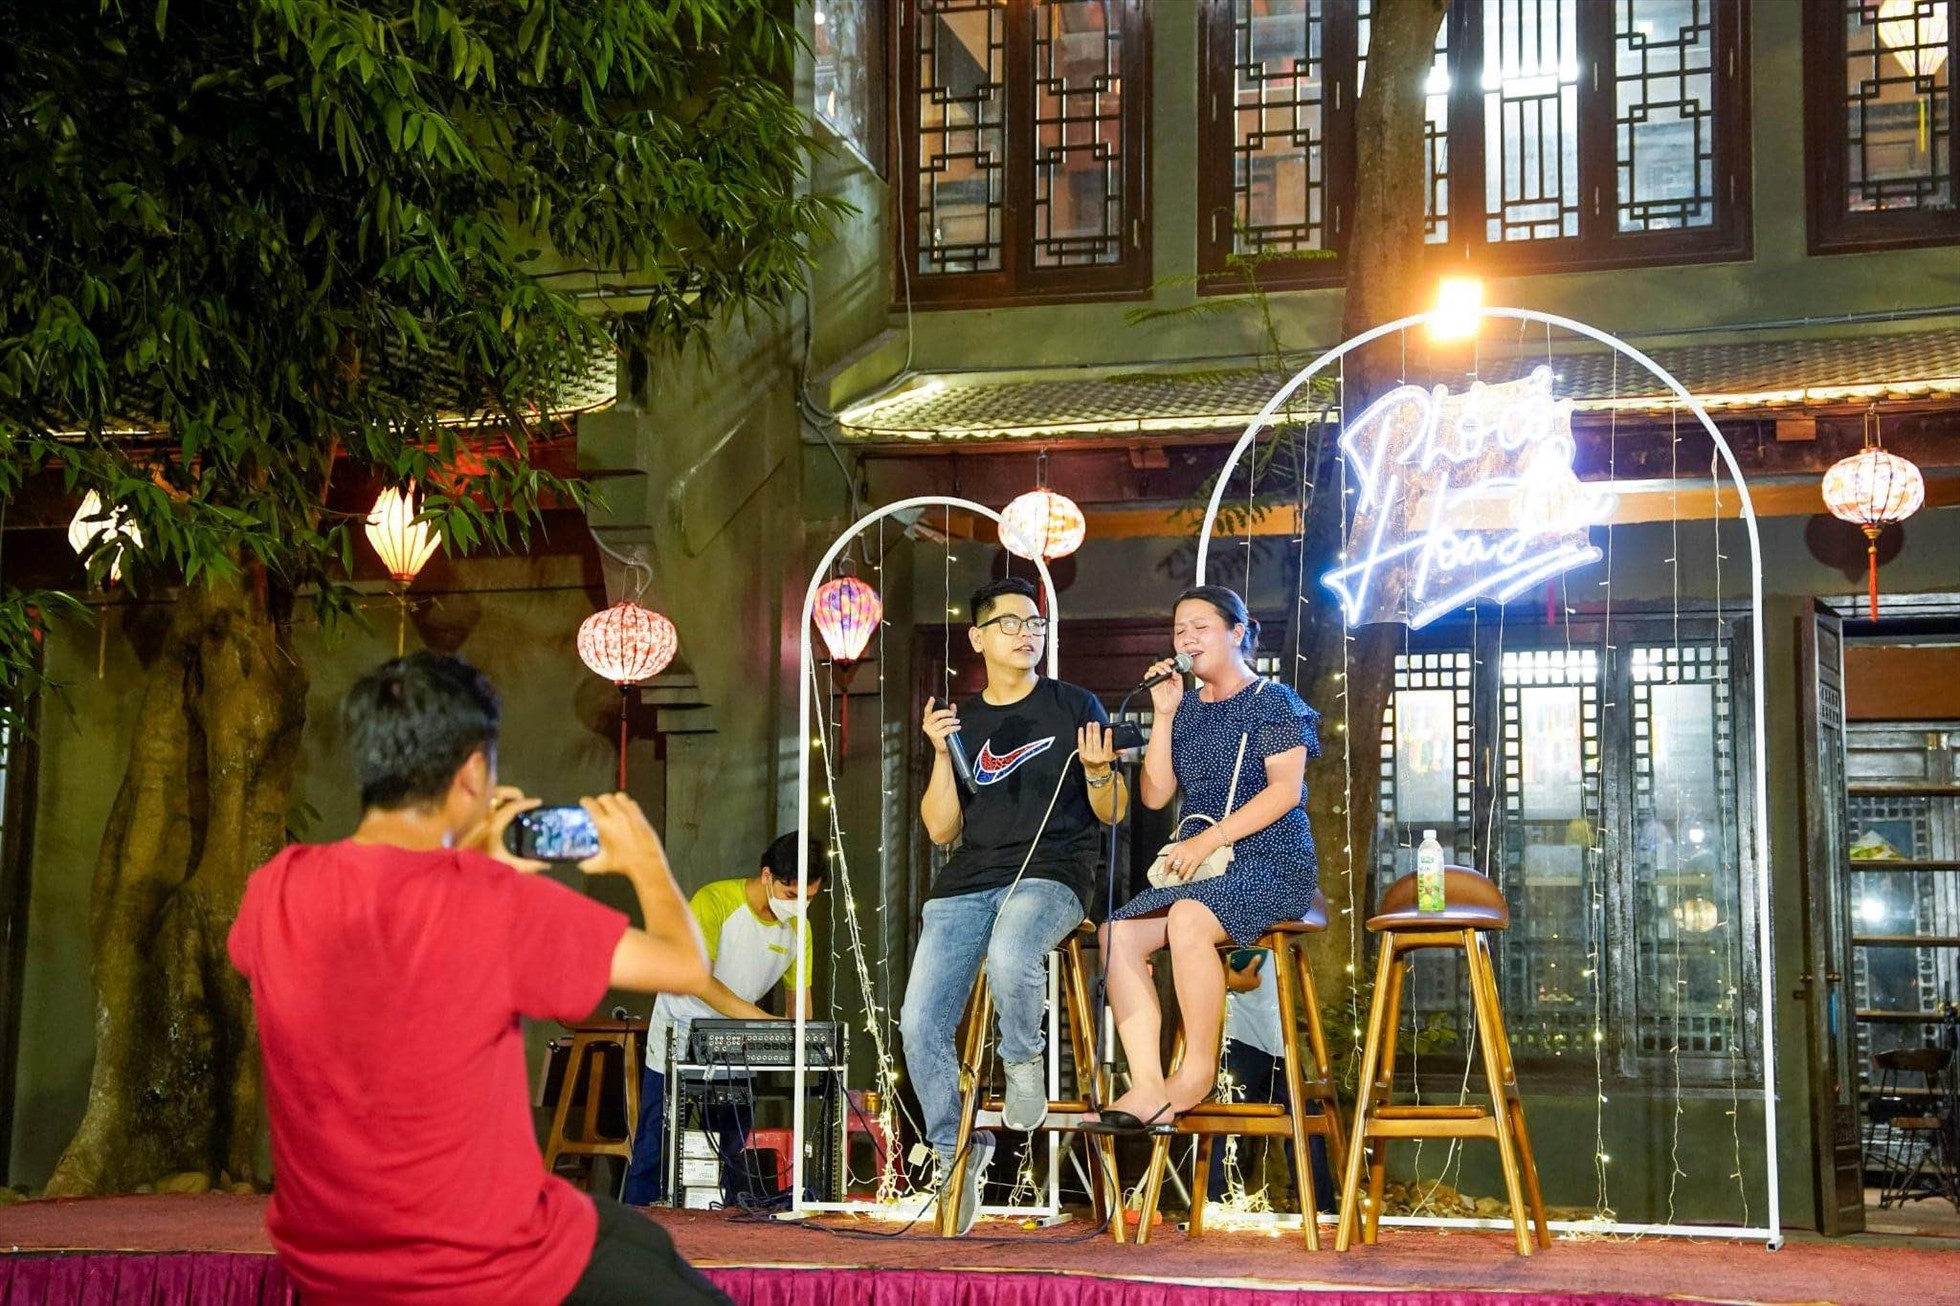 In addition to the food stalls, many neighborhoods also have music shows